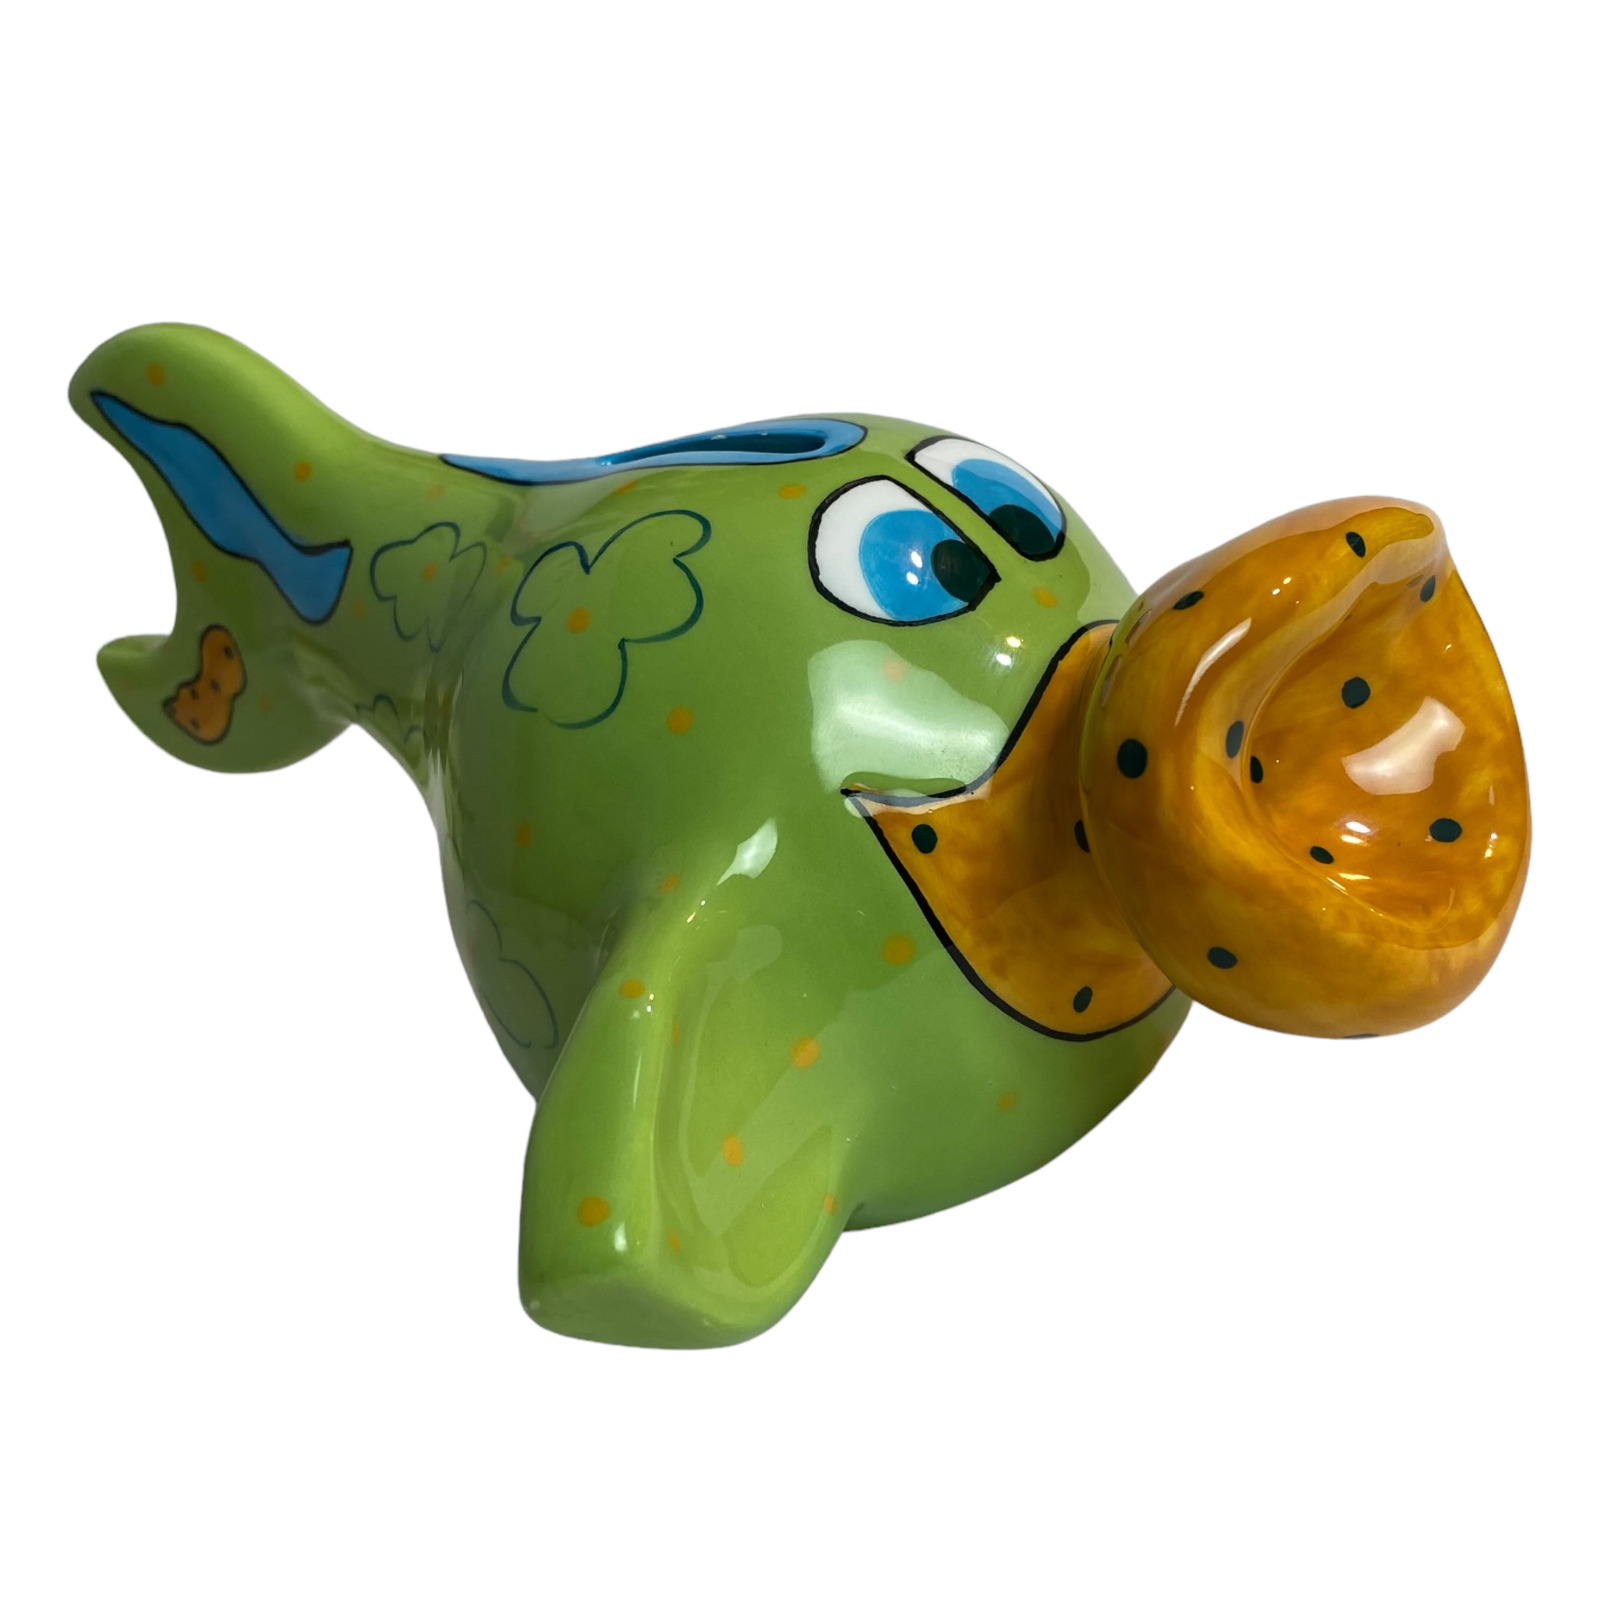 Pati Ganz Fish Bank Hand Painted Big Mouth Whimsical Green Blue Clouds